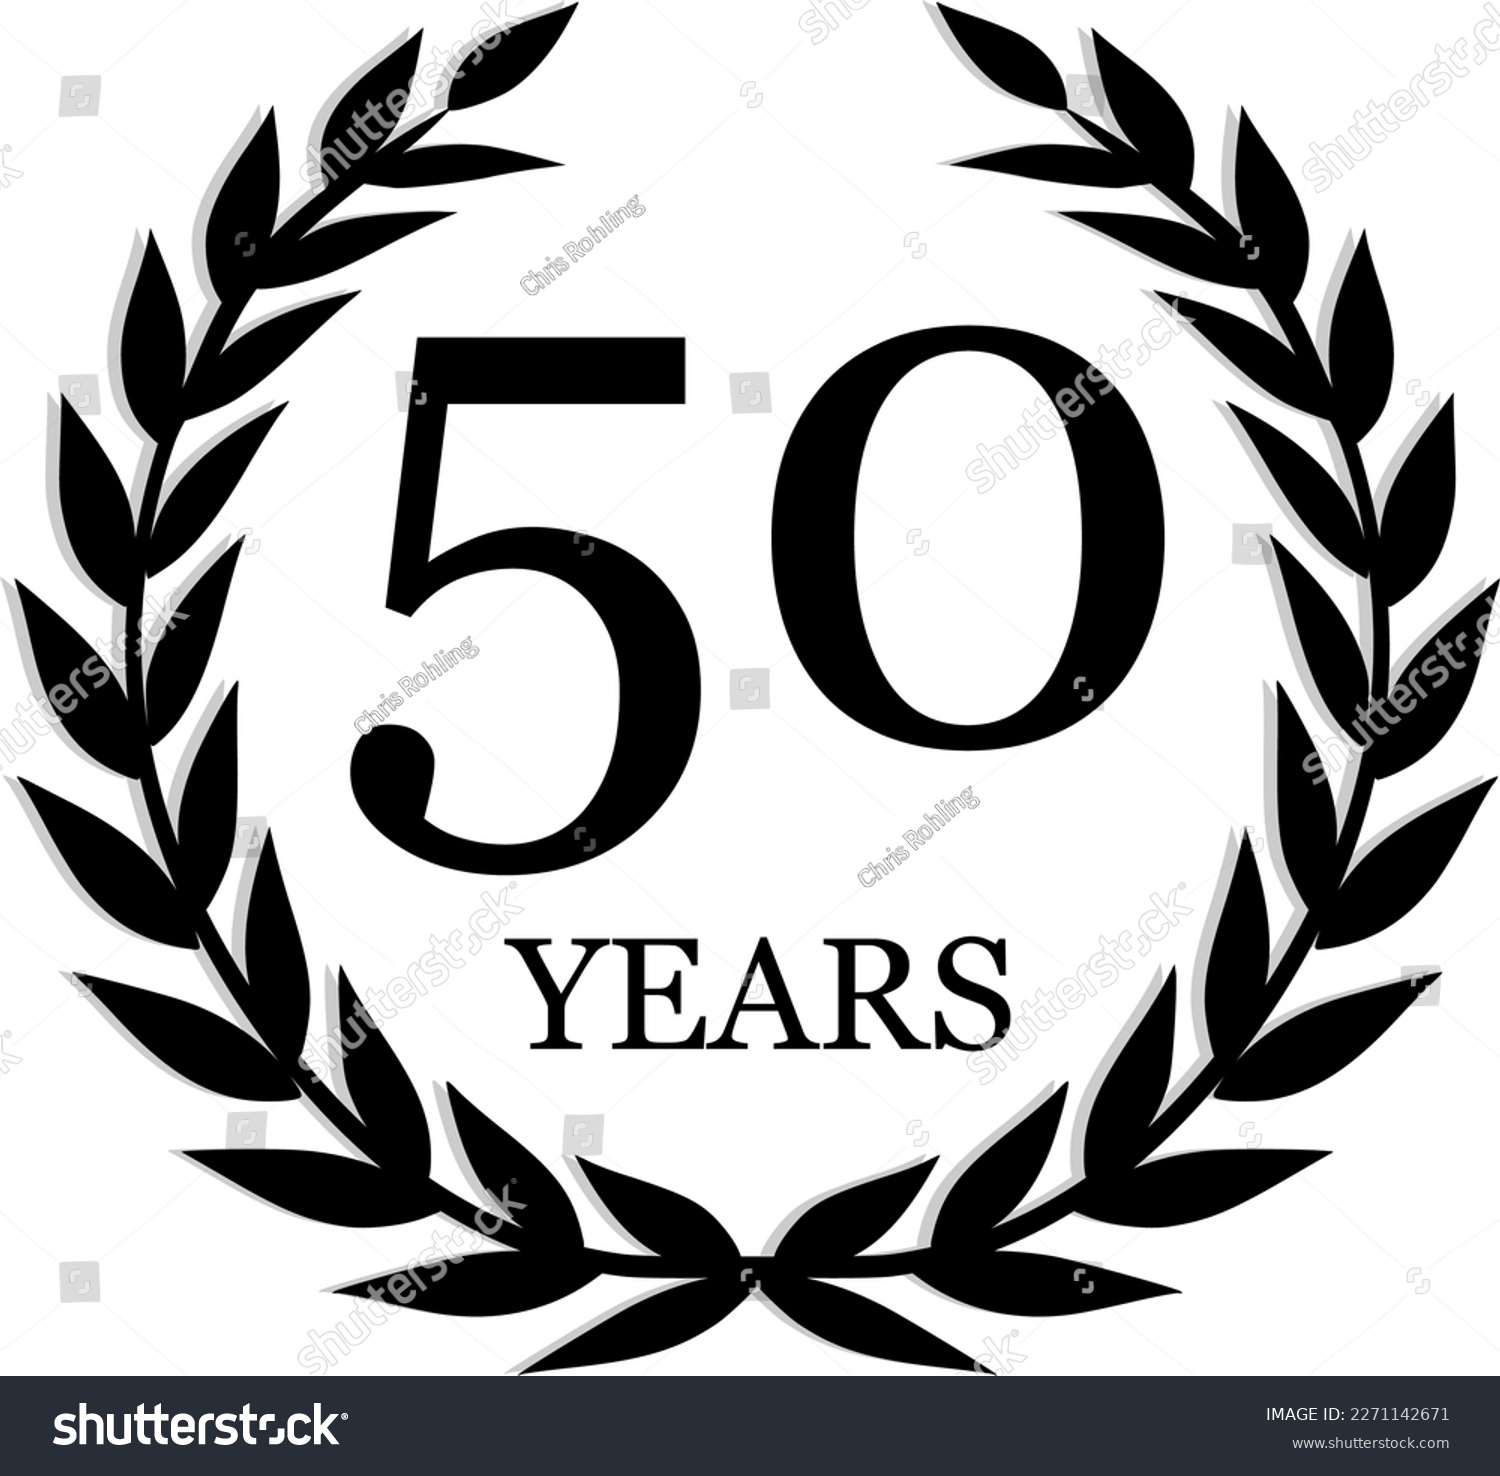 SVG of 50 years anniversary laurel wreath icon, black and white svg